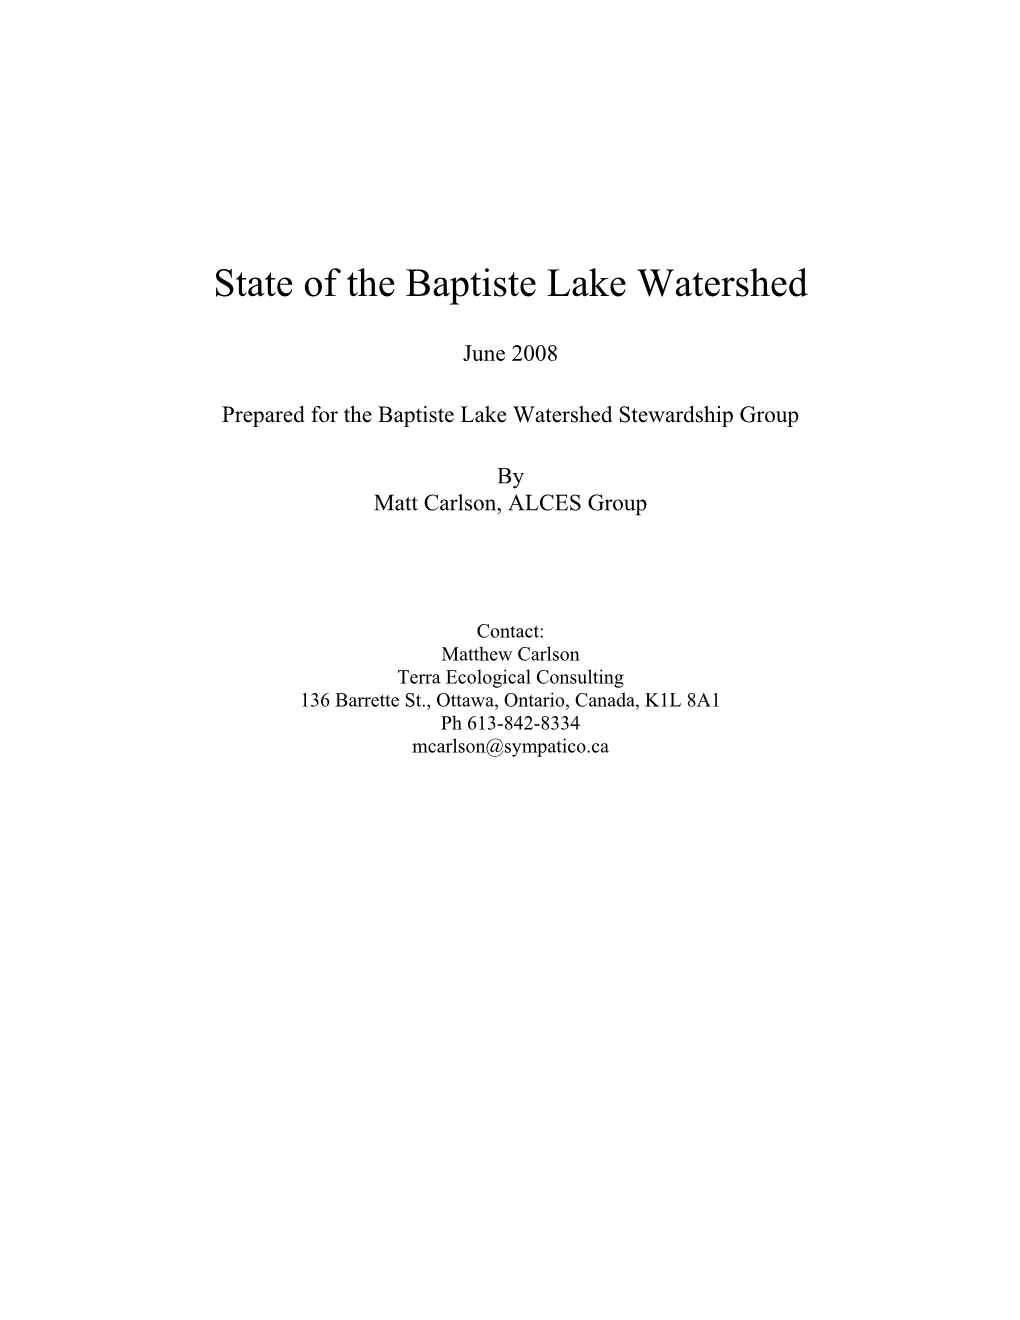 State of the Baptiste Lake Watershed Report